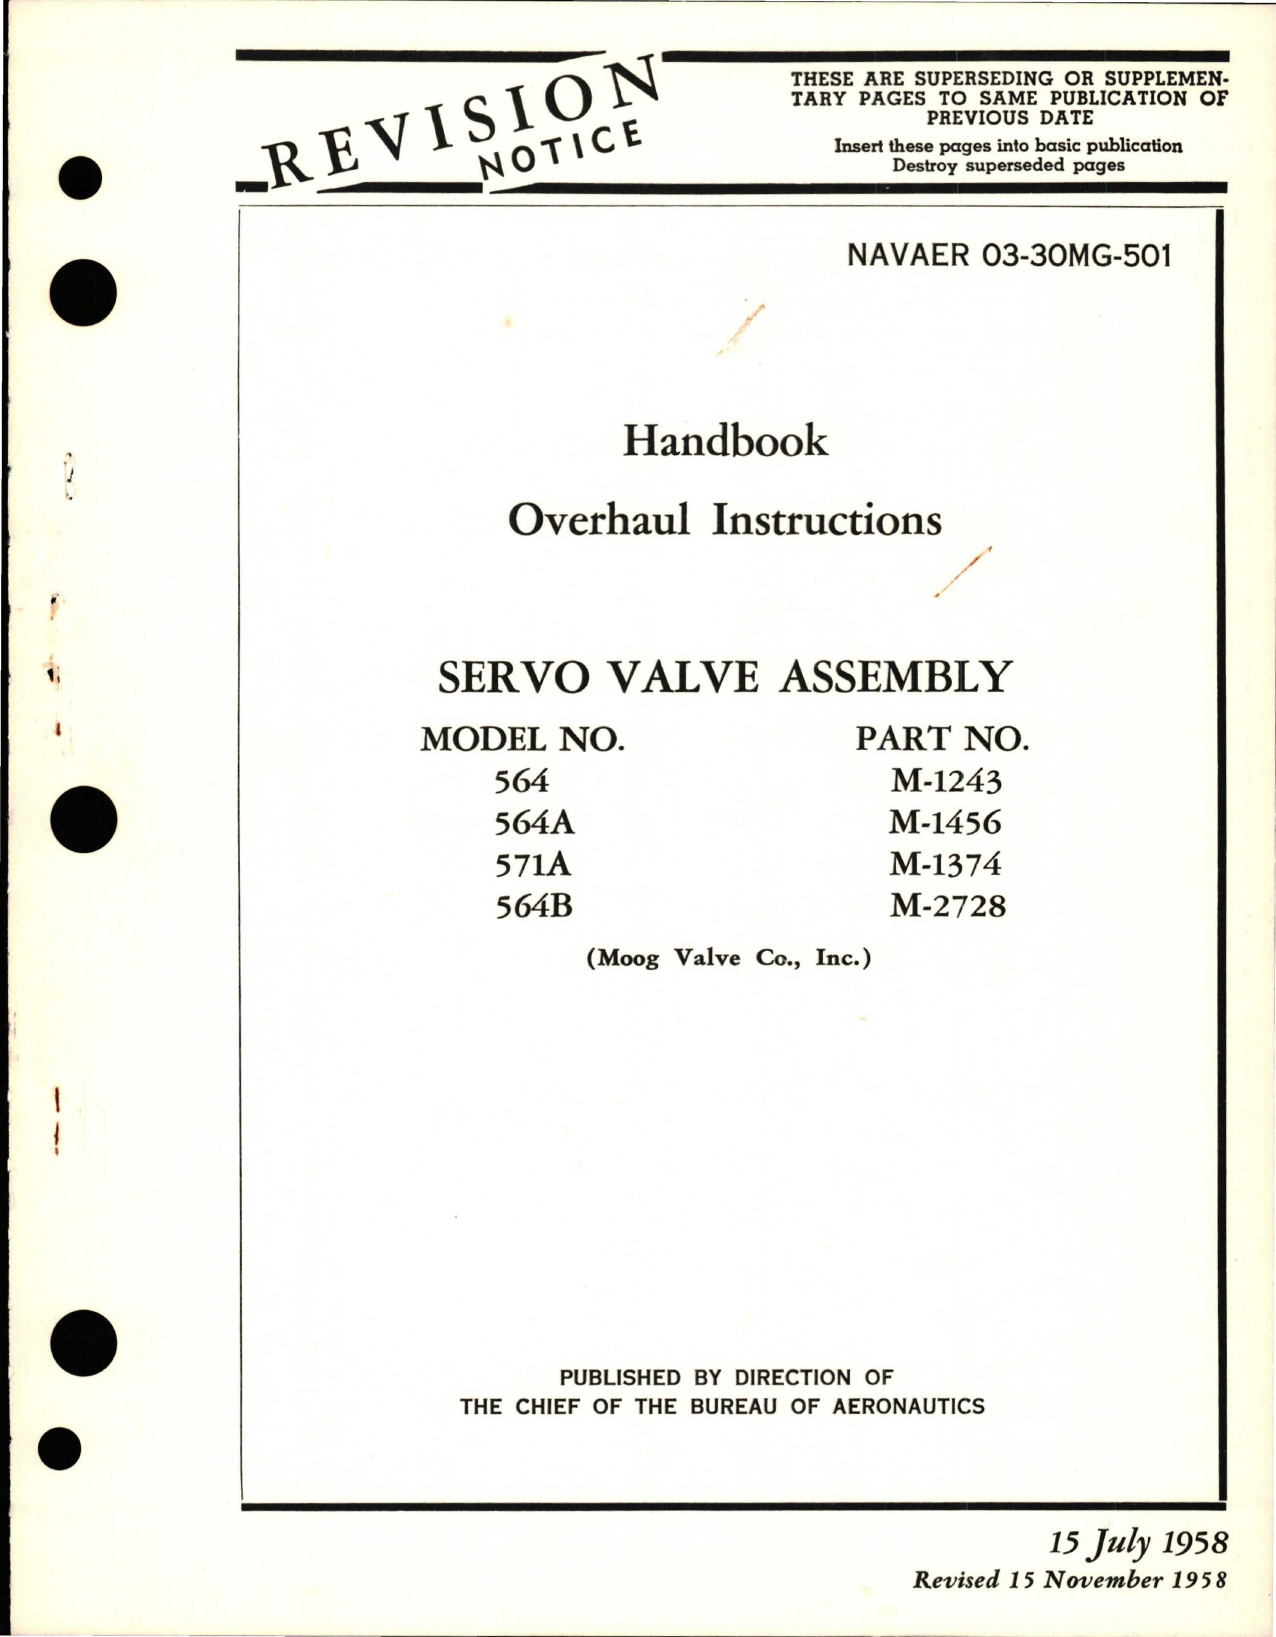 Sample page 1 from AirCorps Library document: Overhaul Instructions for Servo Valve Assembly - Model 564, 564A, 571A, and 564B